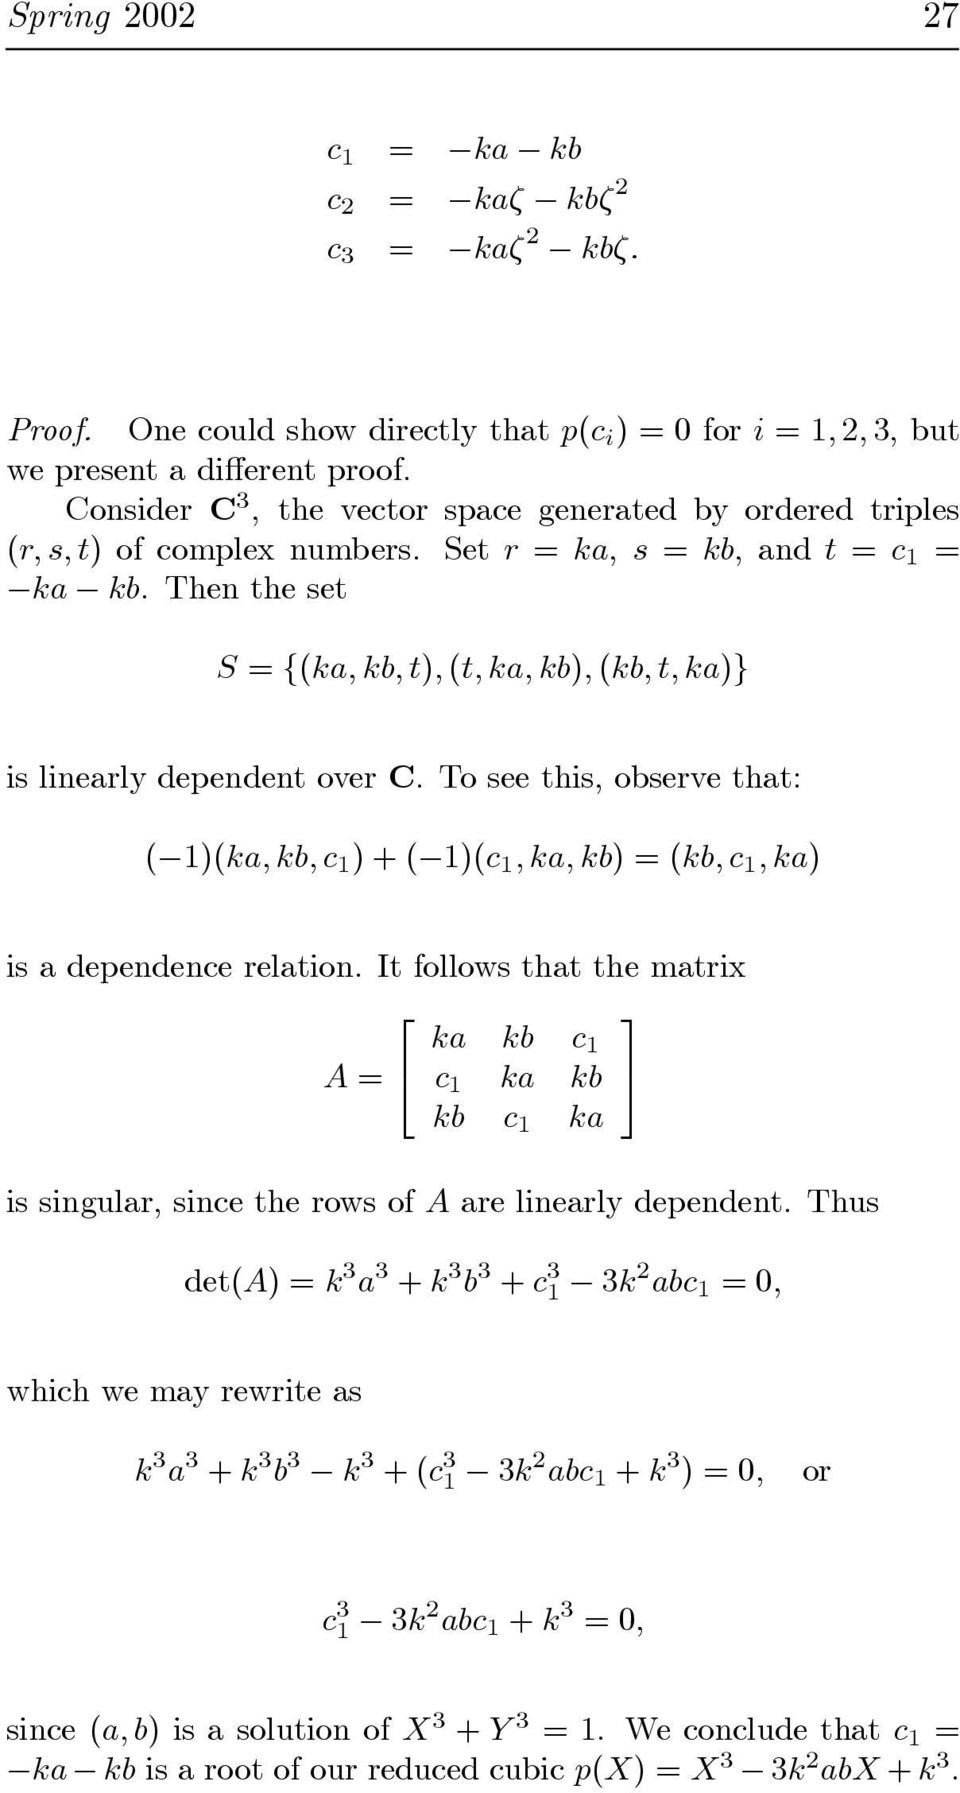 Then the set S = {(ka, kb, t), (t, ka, kb), (kb,t,ka)} is linearly dependent over C. To see this,observe that: ( 1)(ka, kb, c 1 )+( 1)(c 1,ka,kb)=(kb, c 1,ka) is a dependence relation.